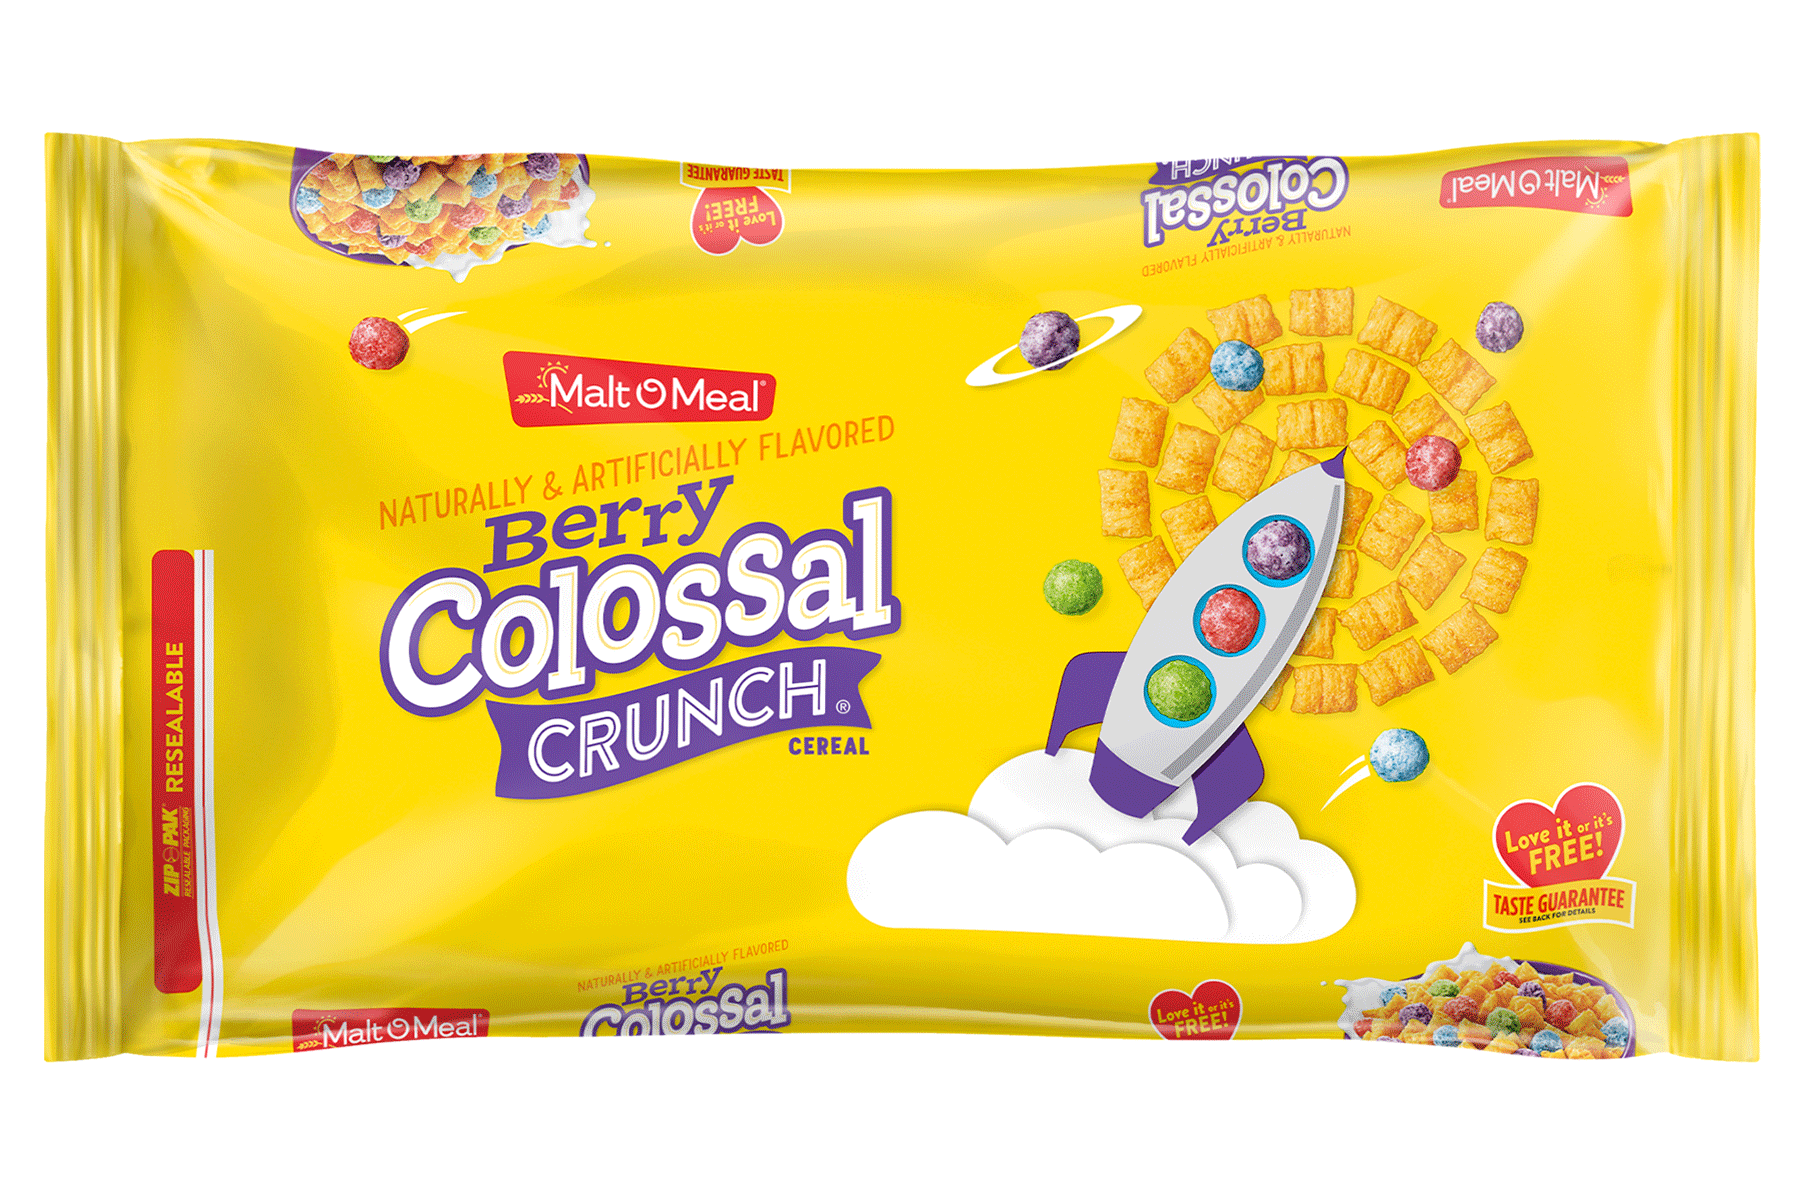 New Malt-O-Meal Berry Colossal Crunch Cereal Bag